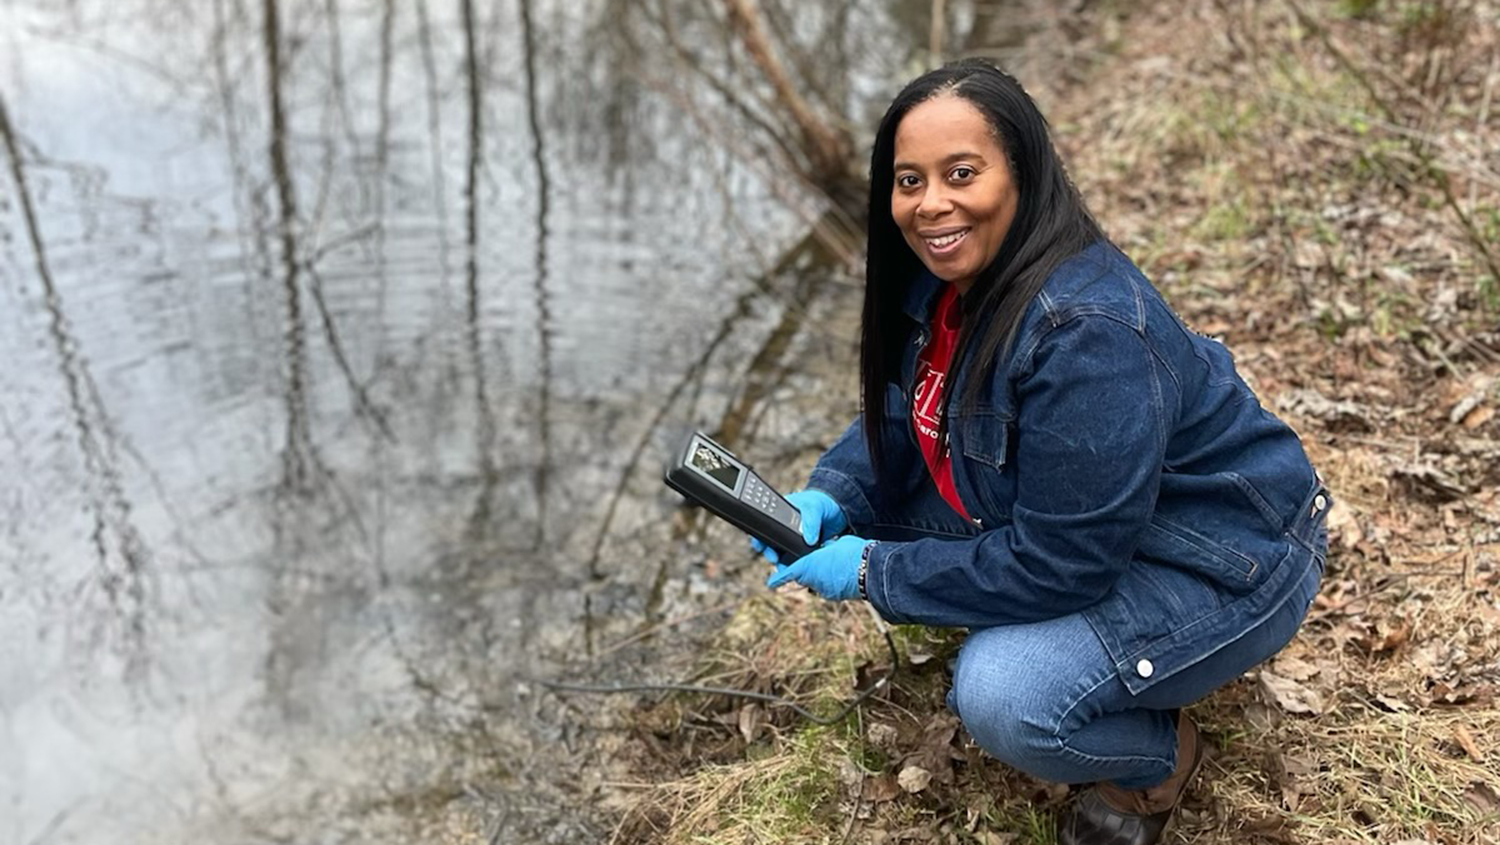 Angela poses outdoors - Celebrating Black Excellence: Angela Allen is Educating Future Leaders - College of Natural Resources News NC State University